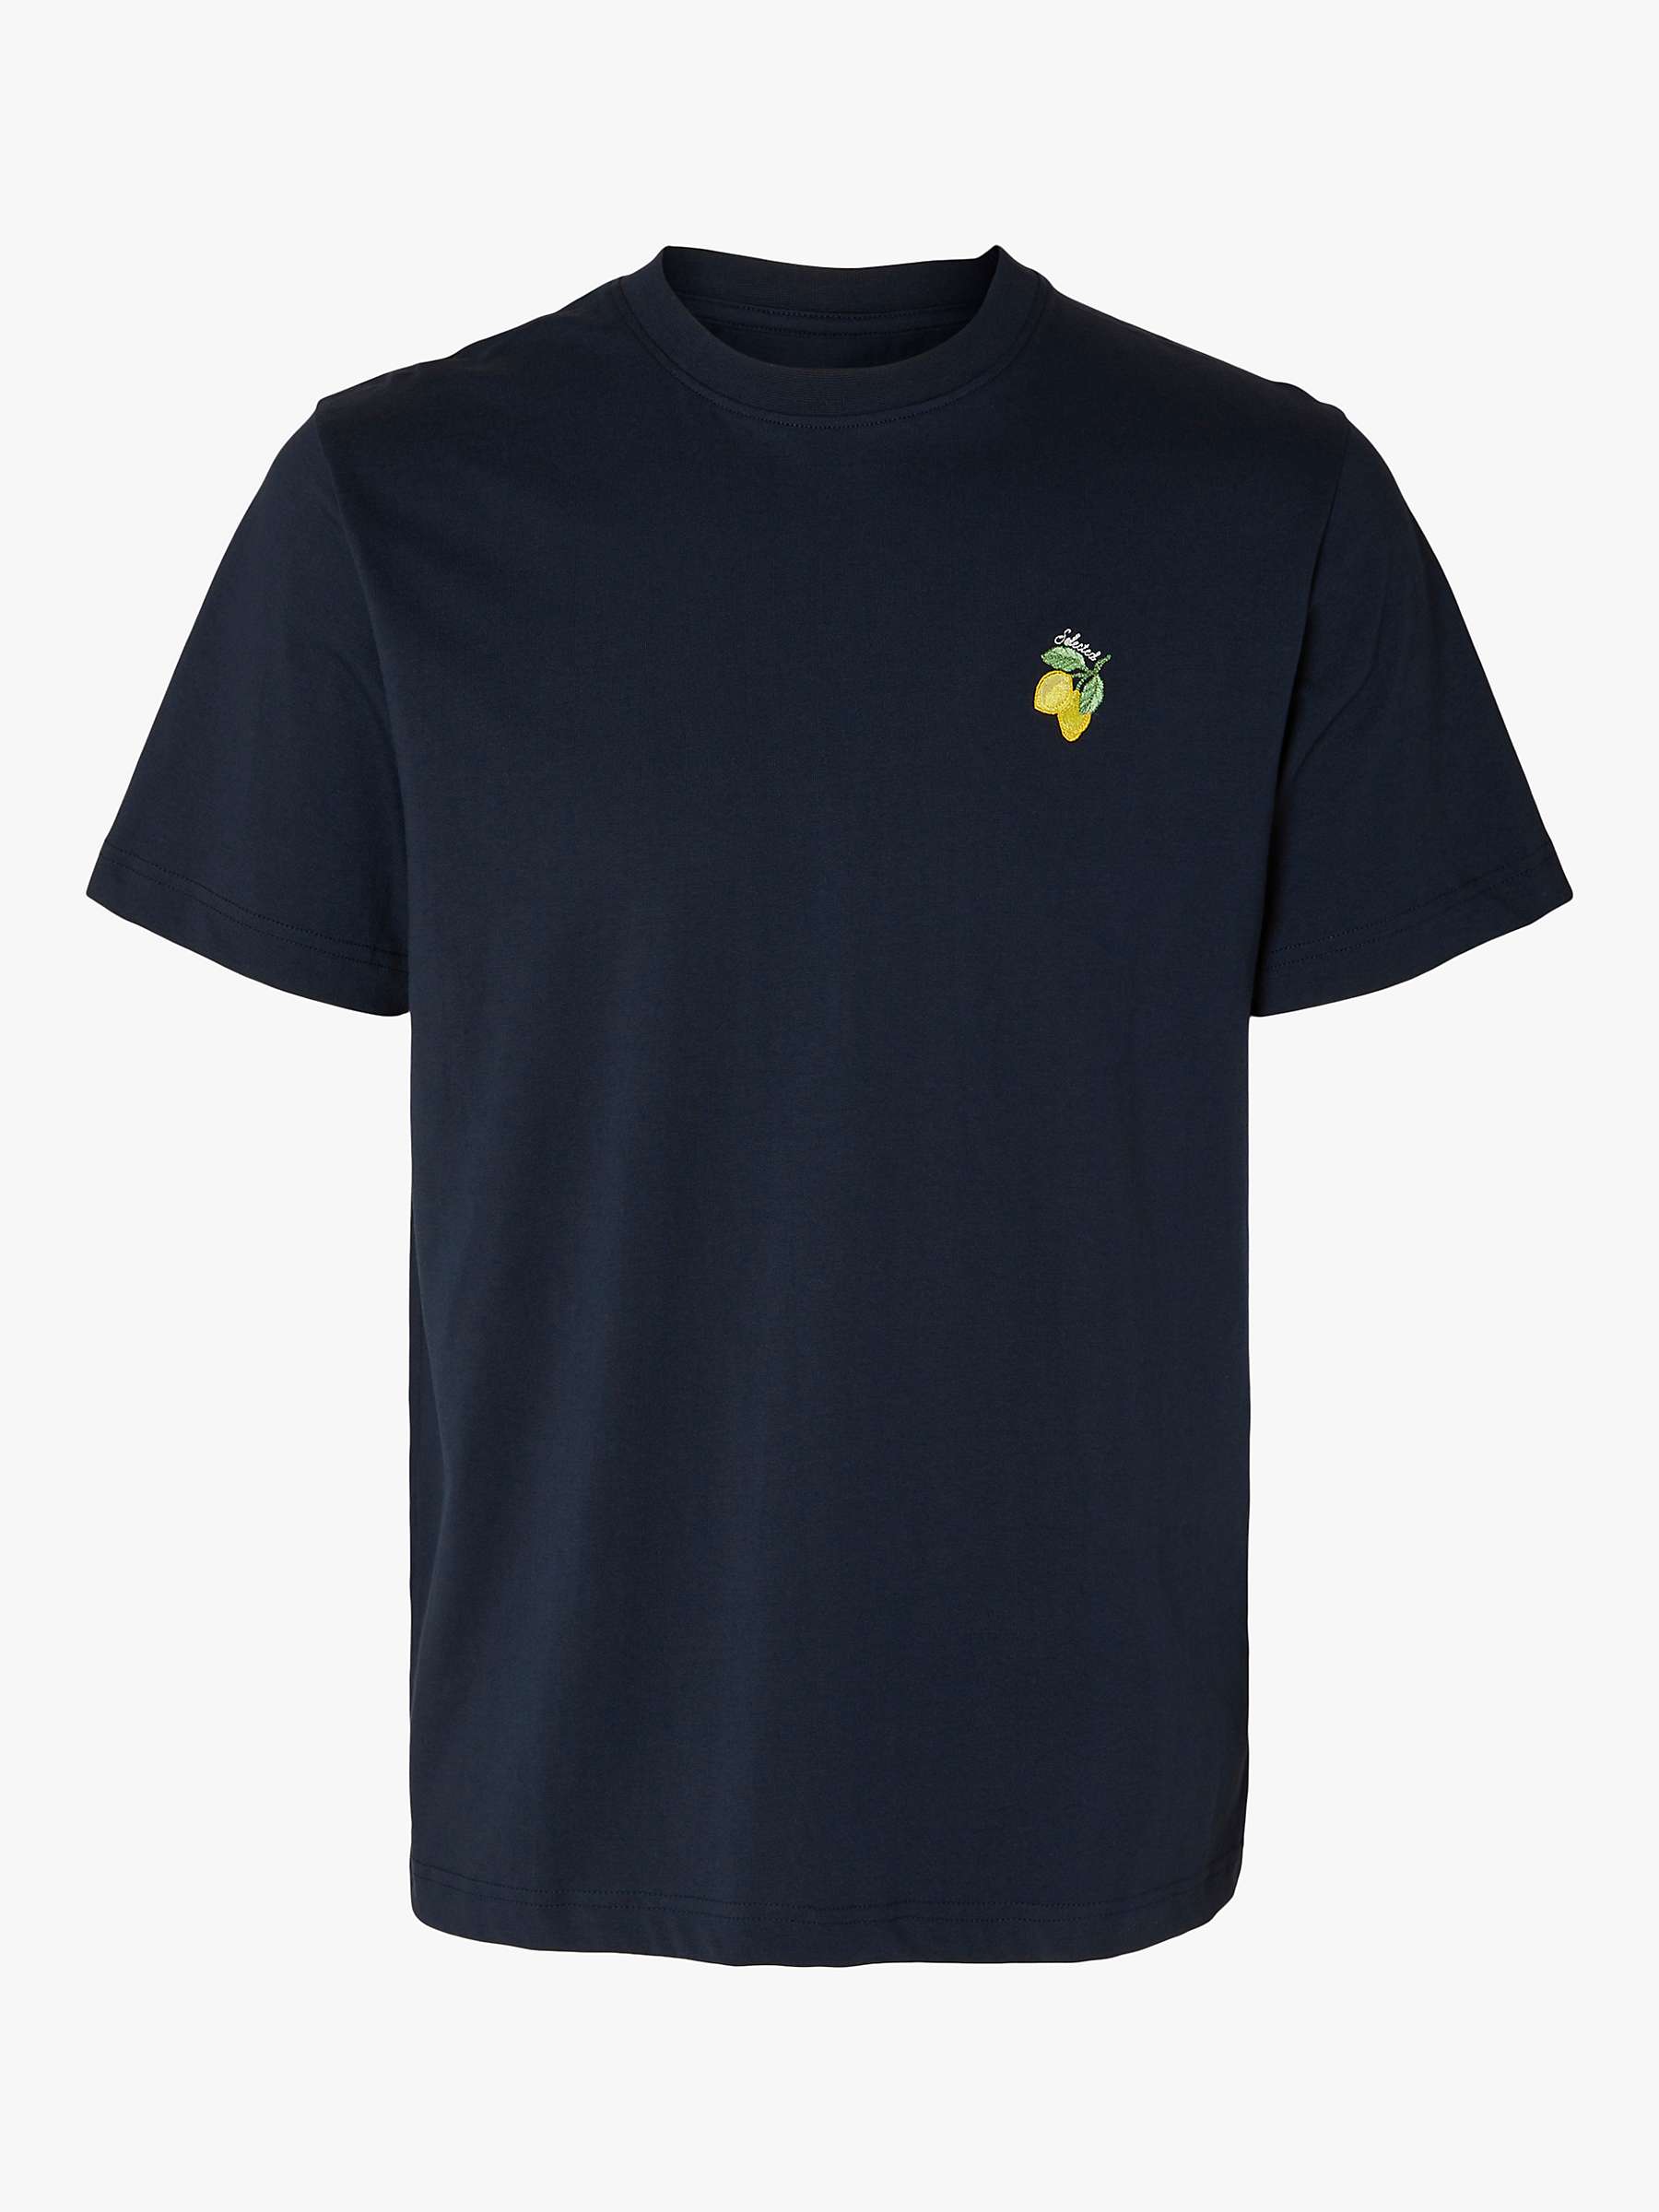 Buy SELECTED HOMME Embroidery Organic Cotton T-Shirt, Sky Captain Online at johnlewis.com